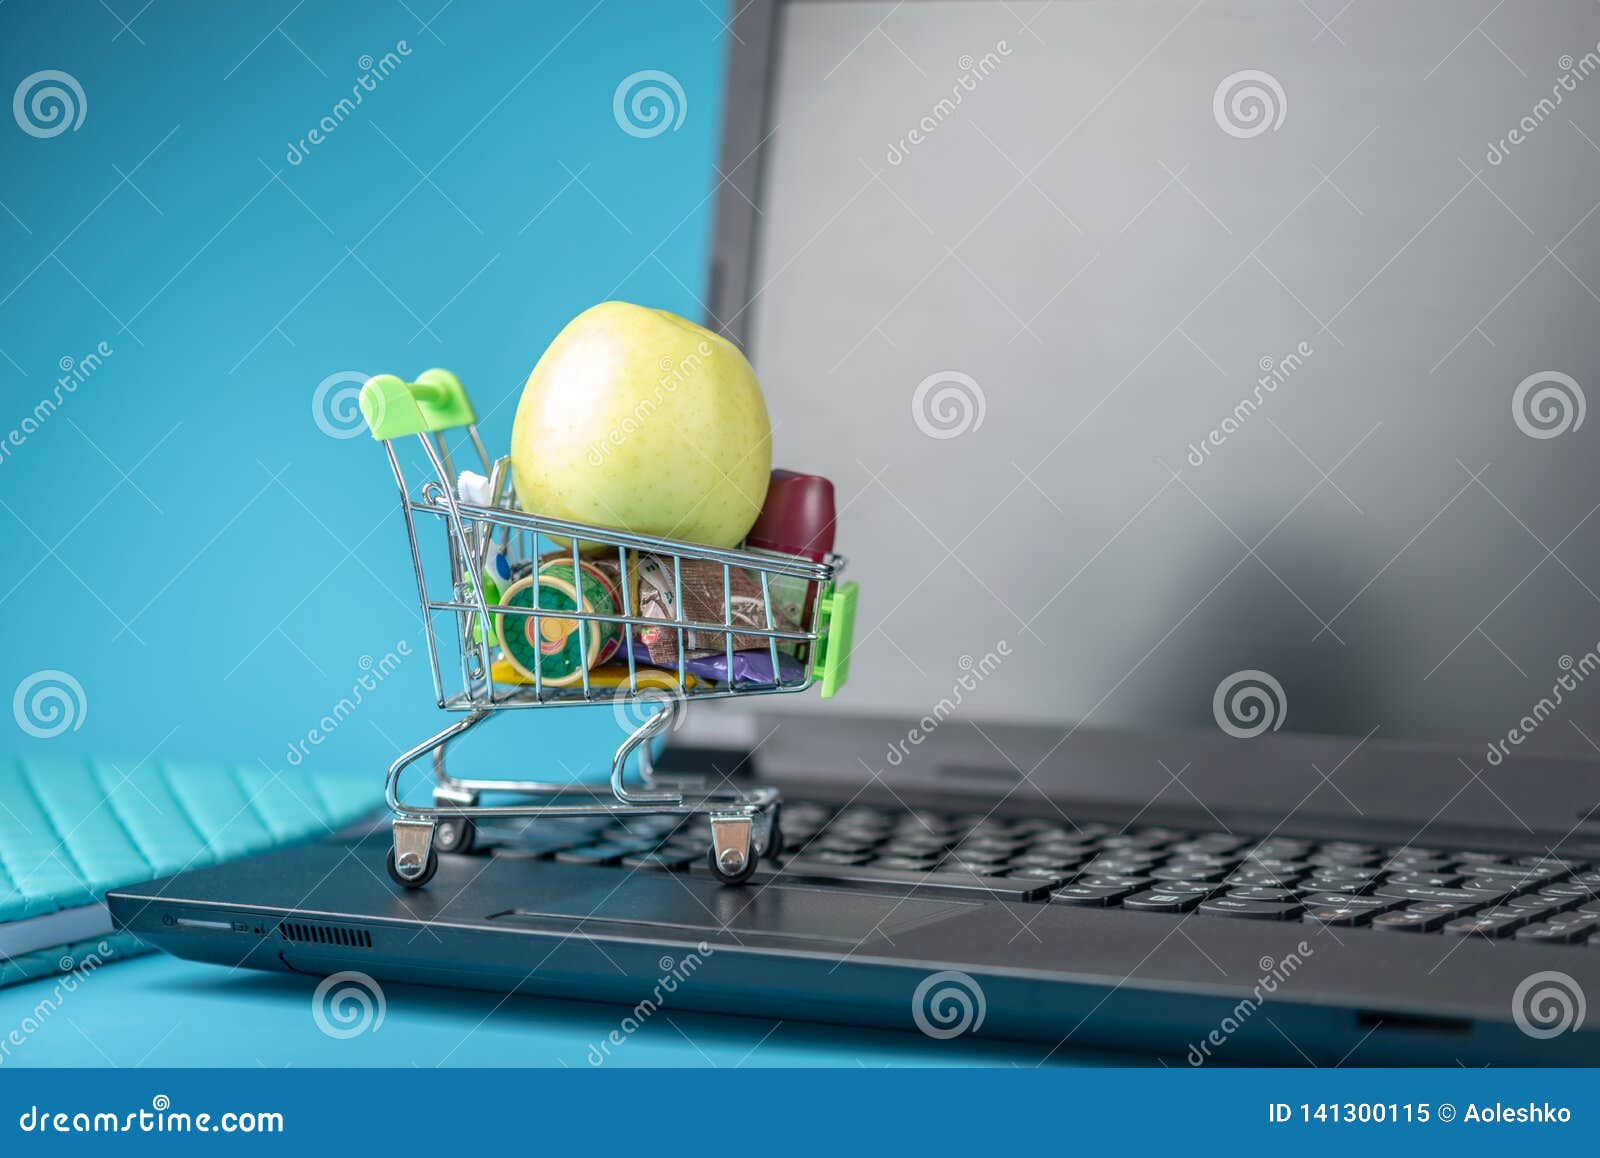 daily purchases in the shopping cart on the laptop keyboard on a blue background. concept of shopping in online stores